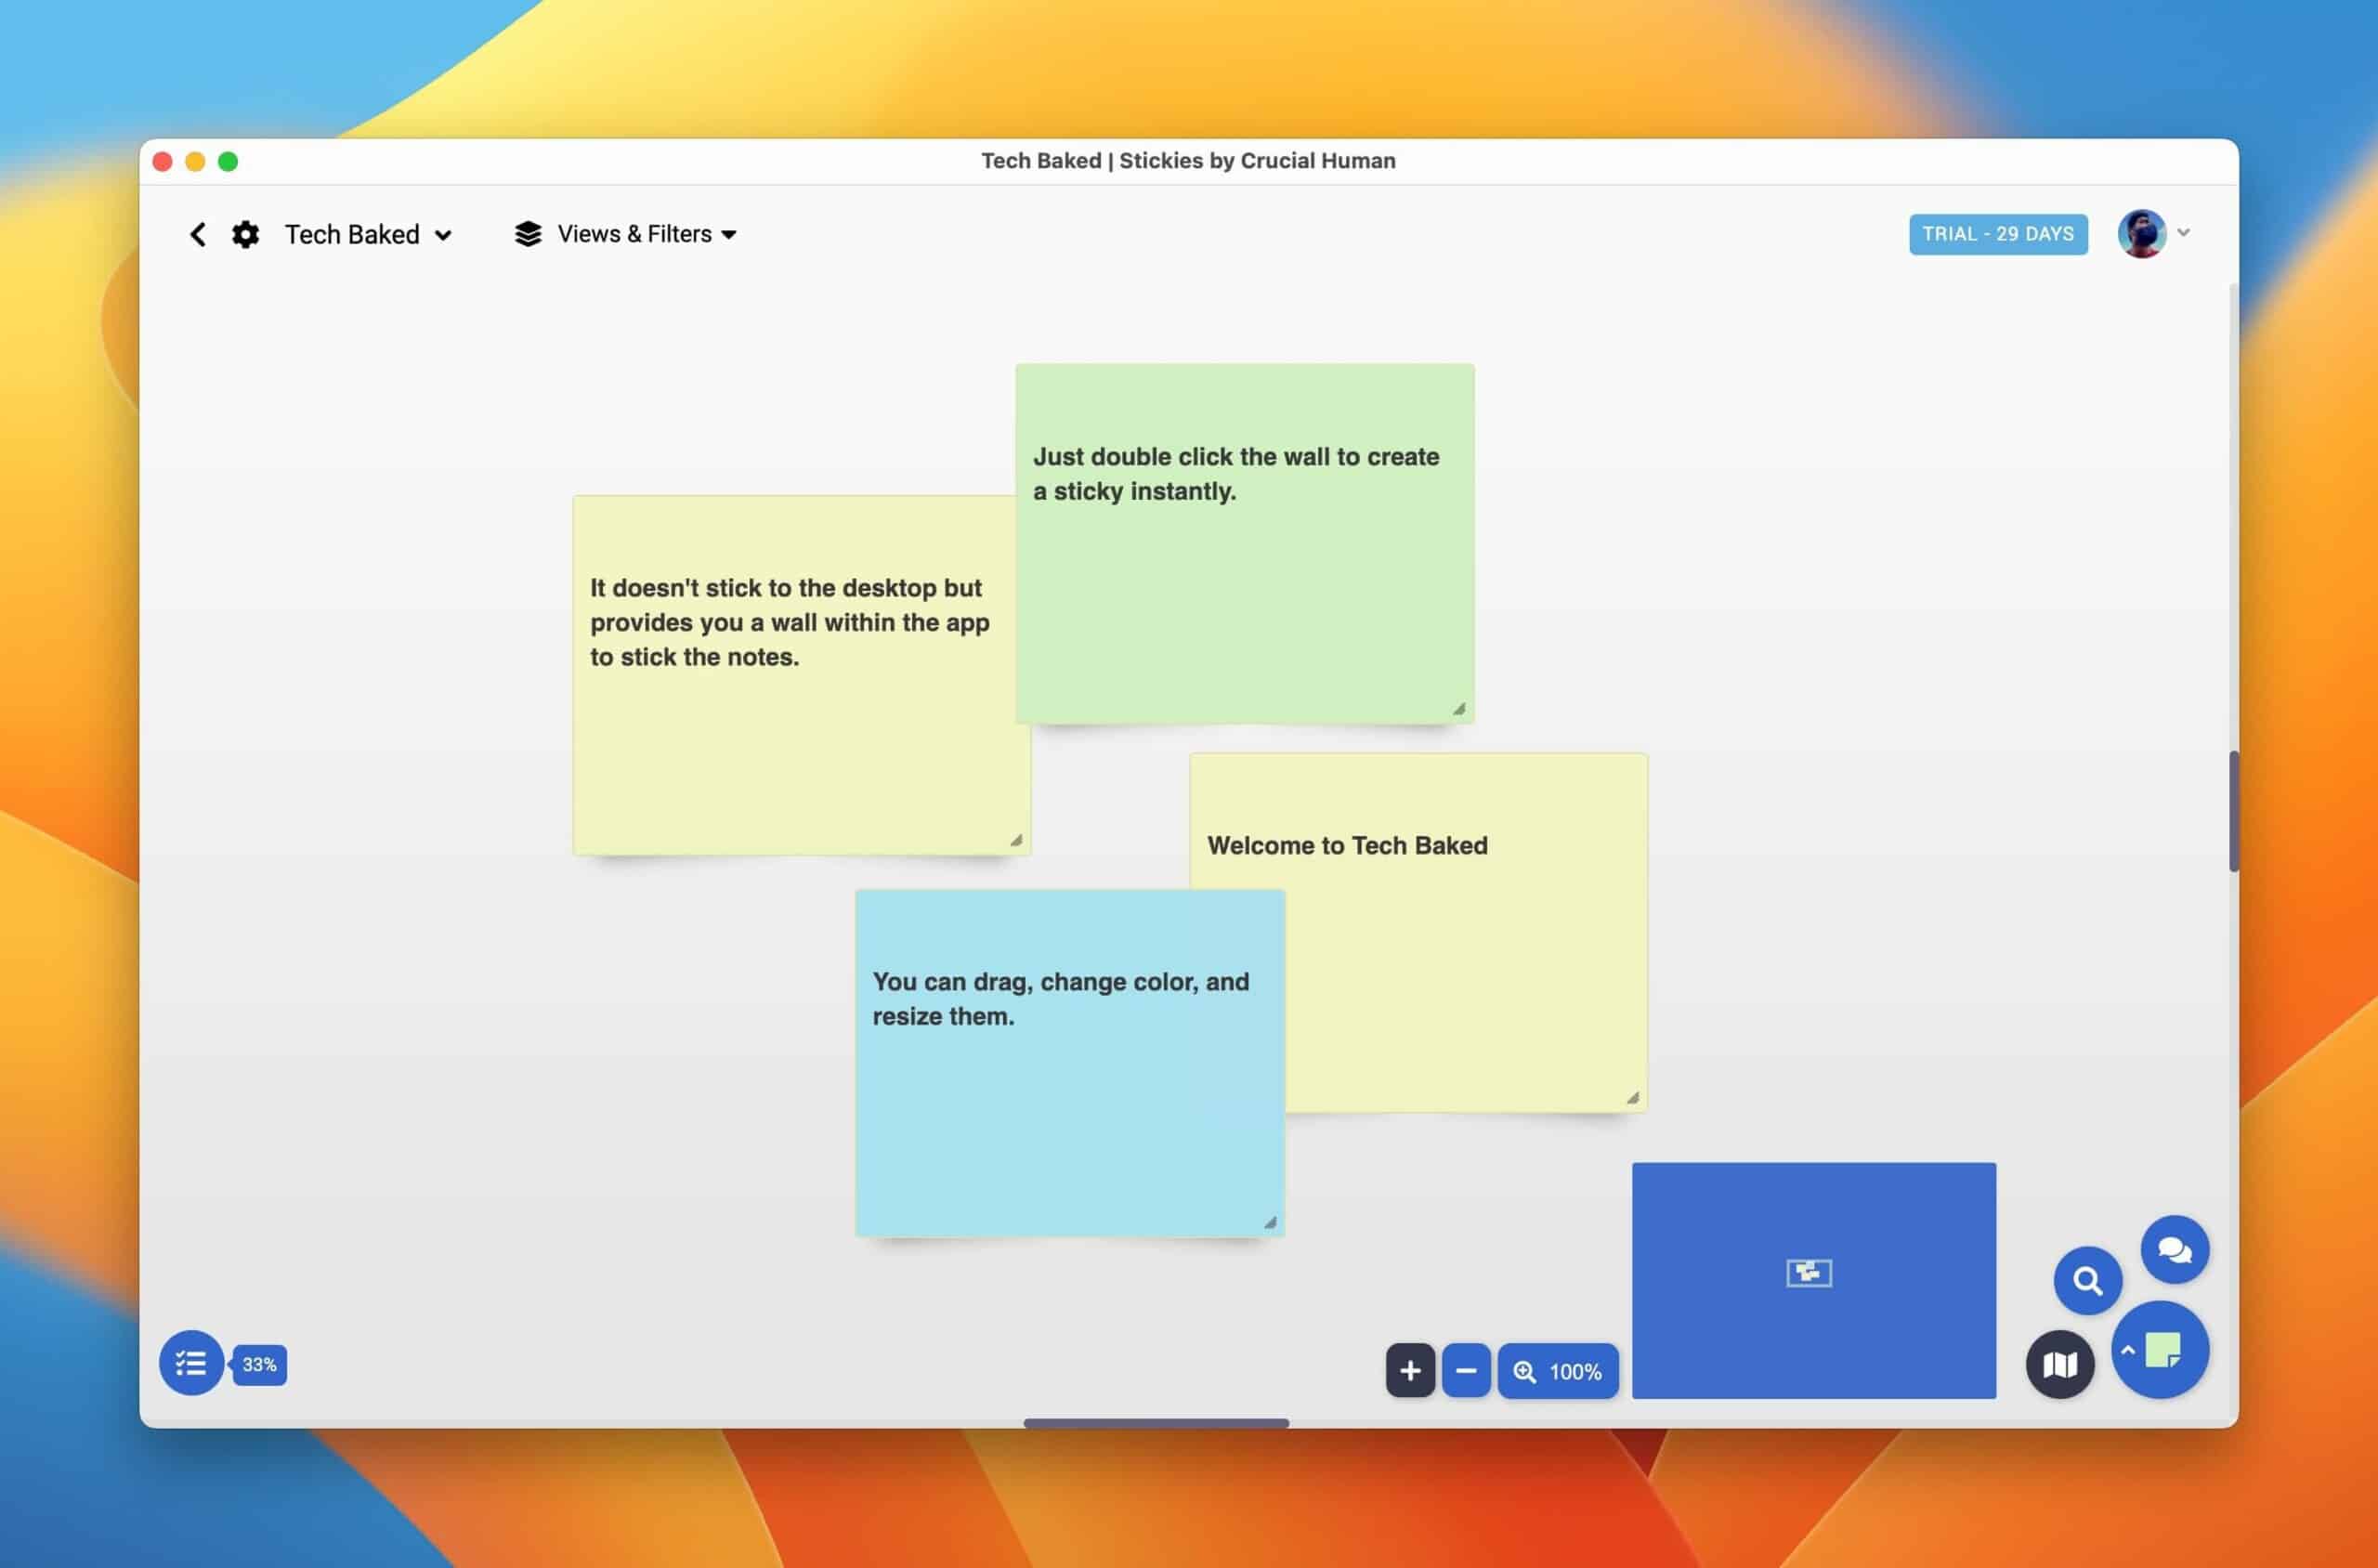 Stickies by Crucial Human on macOS